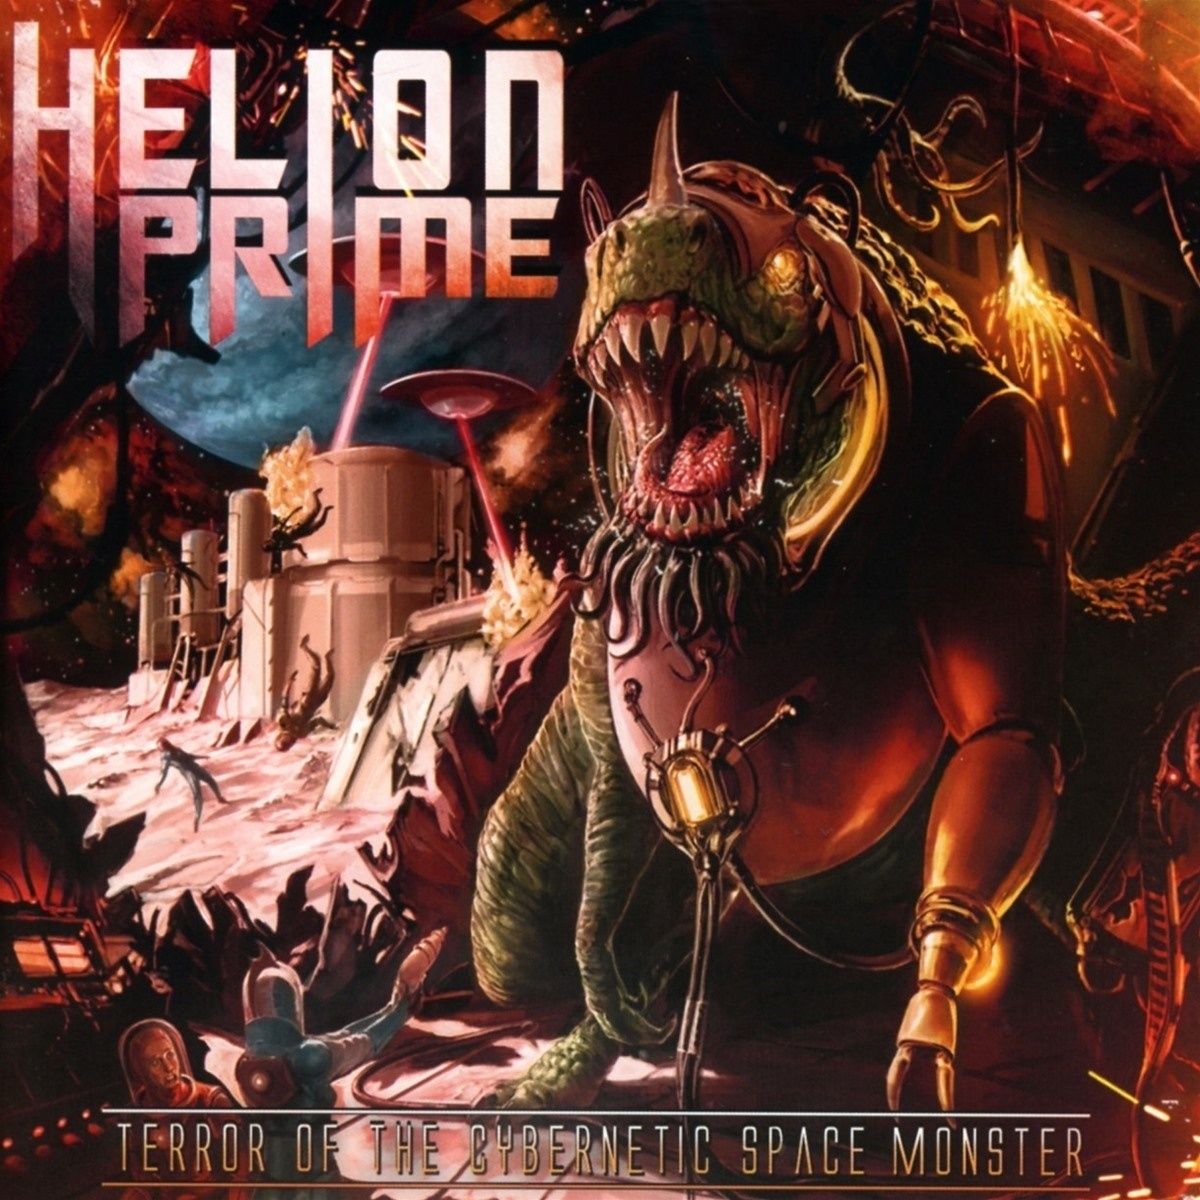 Terror Of The Cybernetic Space Monster - Helion Prime. (CD)